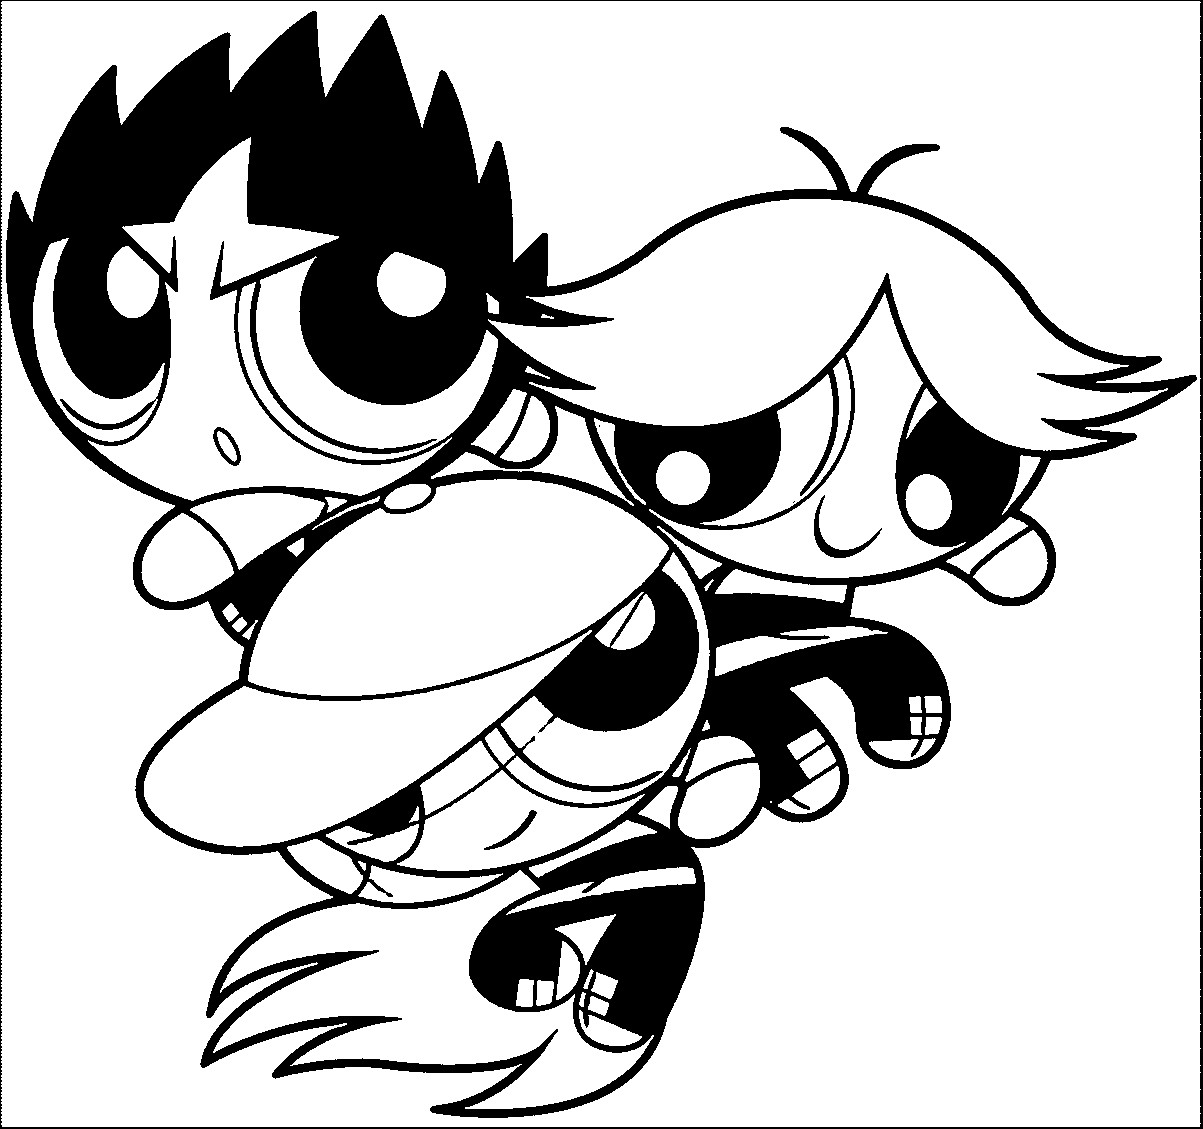 The Powerpuff Girls Coloring Pages
 Pin on color pages